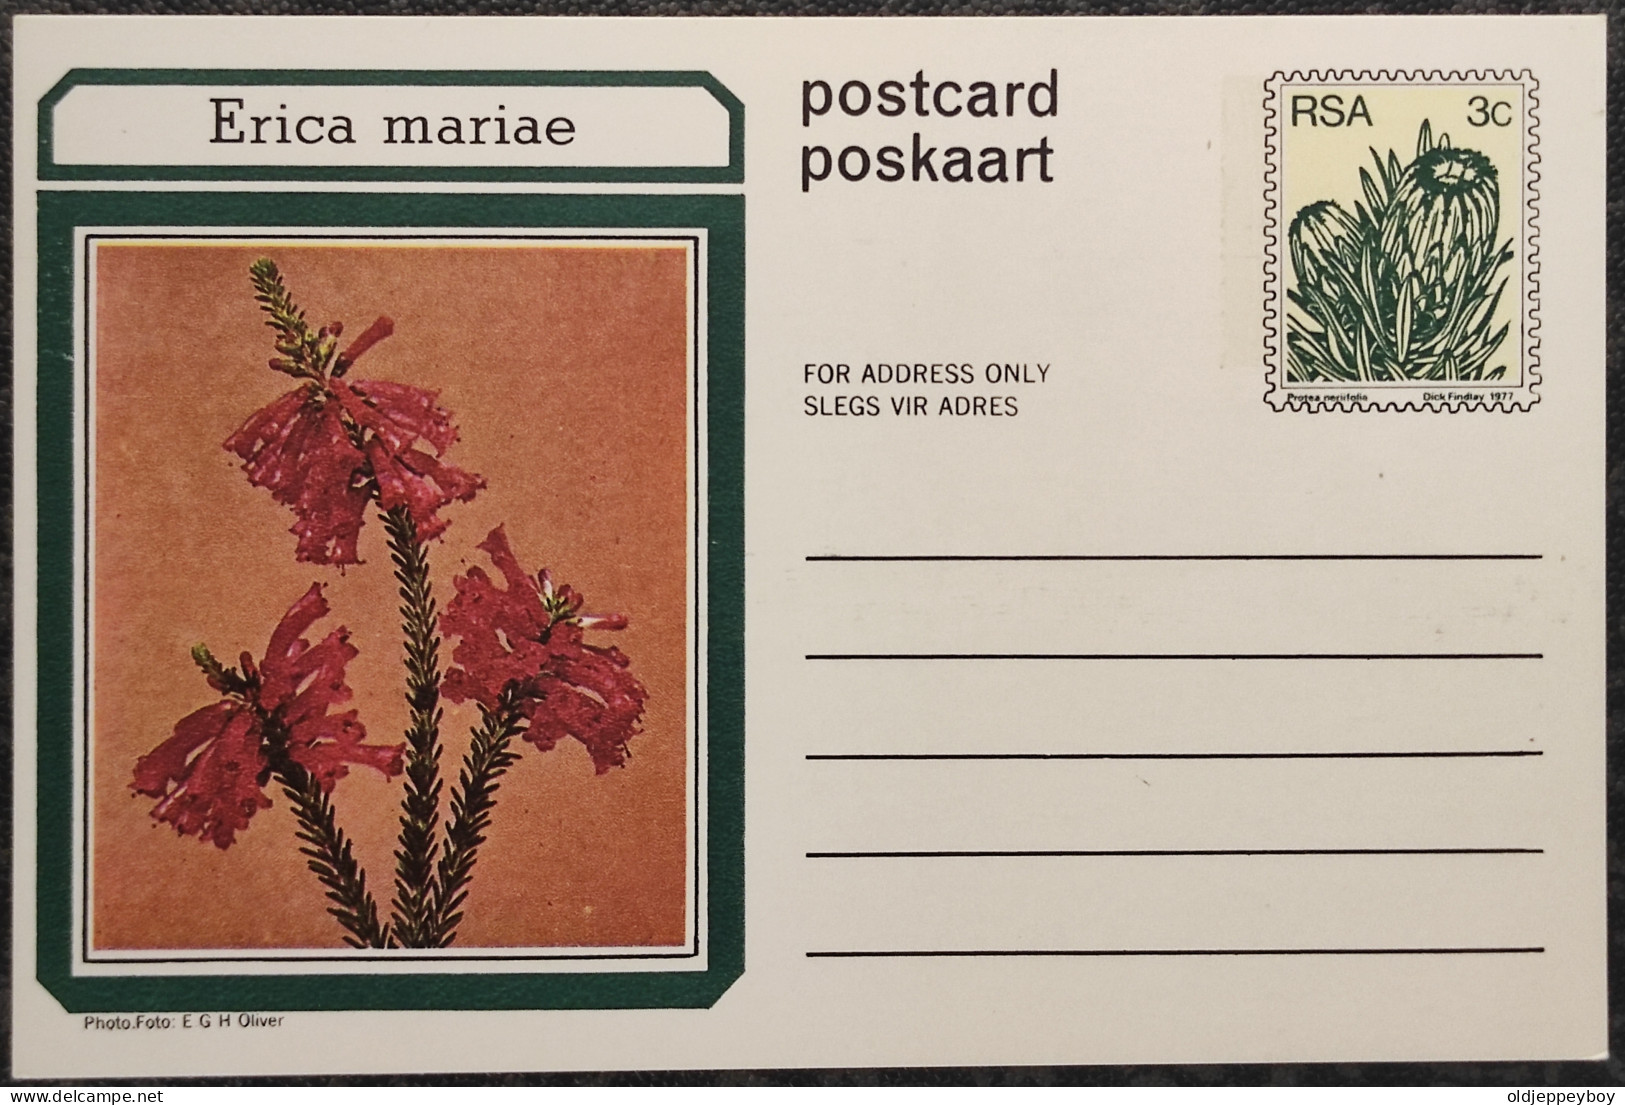 3c SOUTH AFRICA Postal STATIONERY CARD Illus ERICA MARIAE FLOWER Cover Stamps Flowers Rsa - Brieven En Documenten